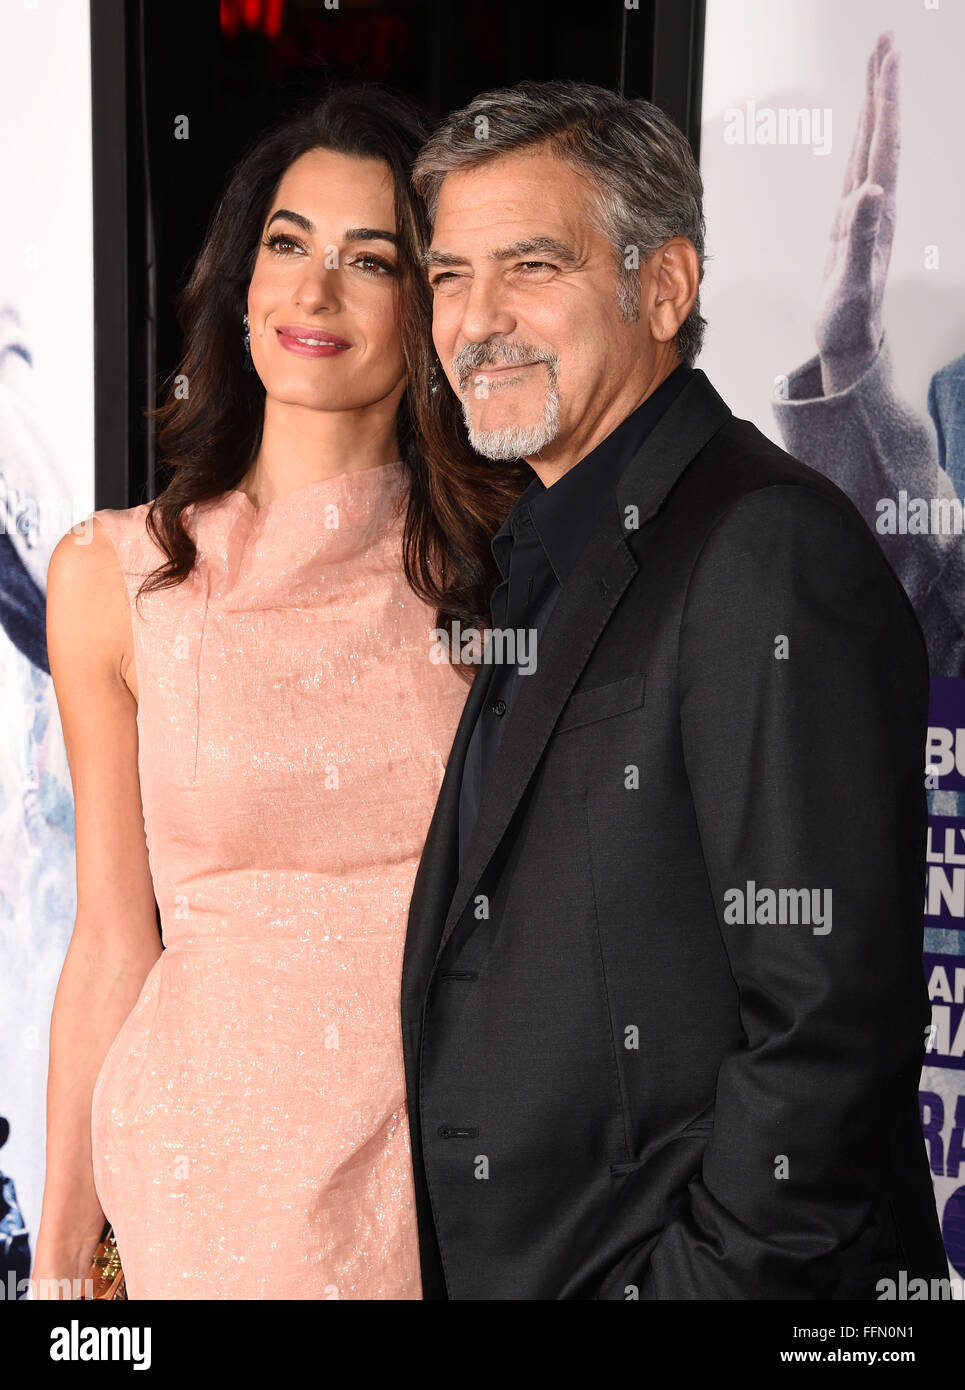 Actor George Clooney (R) and wife Amal Clooney arrive at the premiere of Warner Bros. Pictures' 'Our Brand Is Crisis' at TCL Chinese Theatre on October 26, 2015 in Hollywood, California., Stock Photo